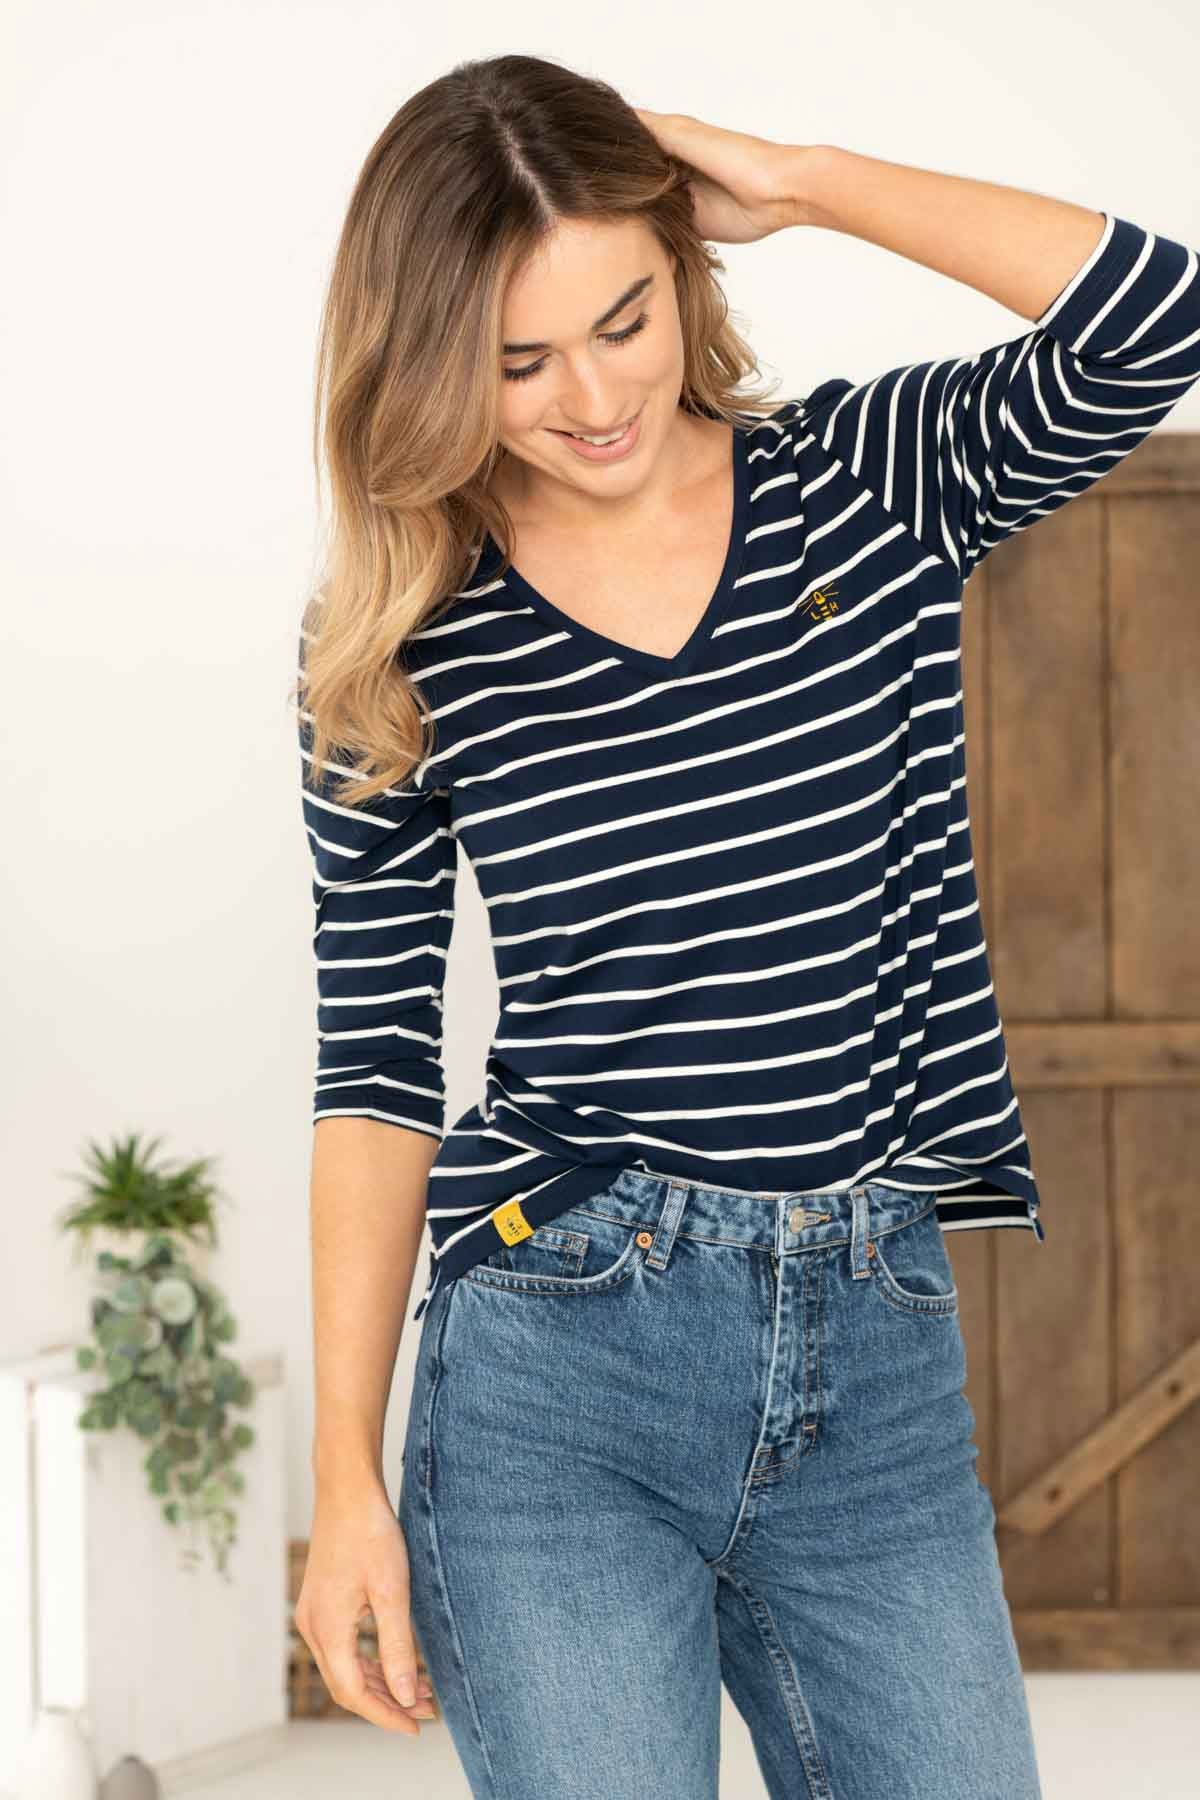 Navy stripe Ariana Cotton Ladies Top by Lighthouse